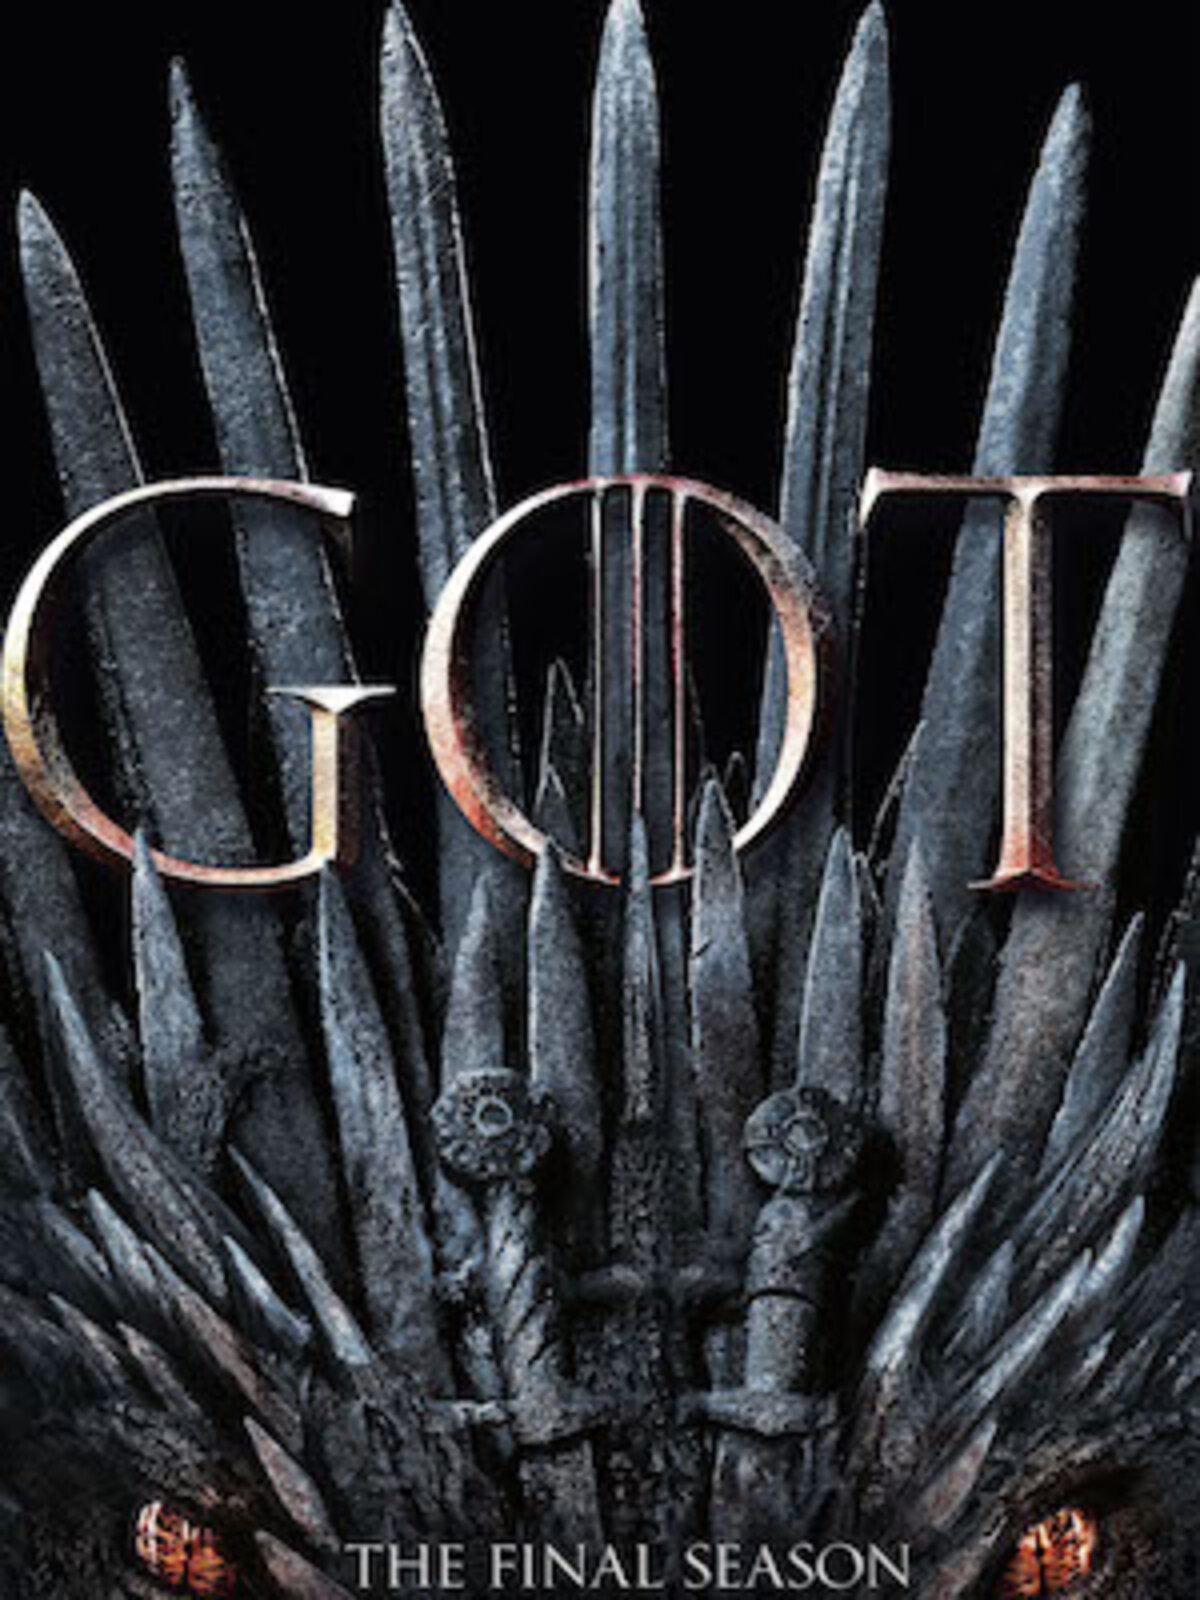 Poster for Game of Thrones (GOT) of the iron throne, made of swords